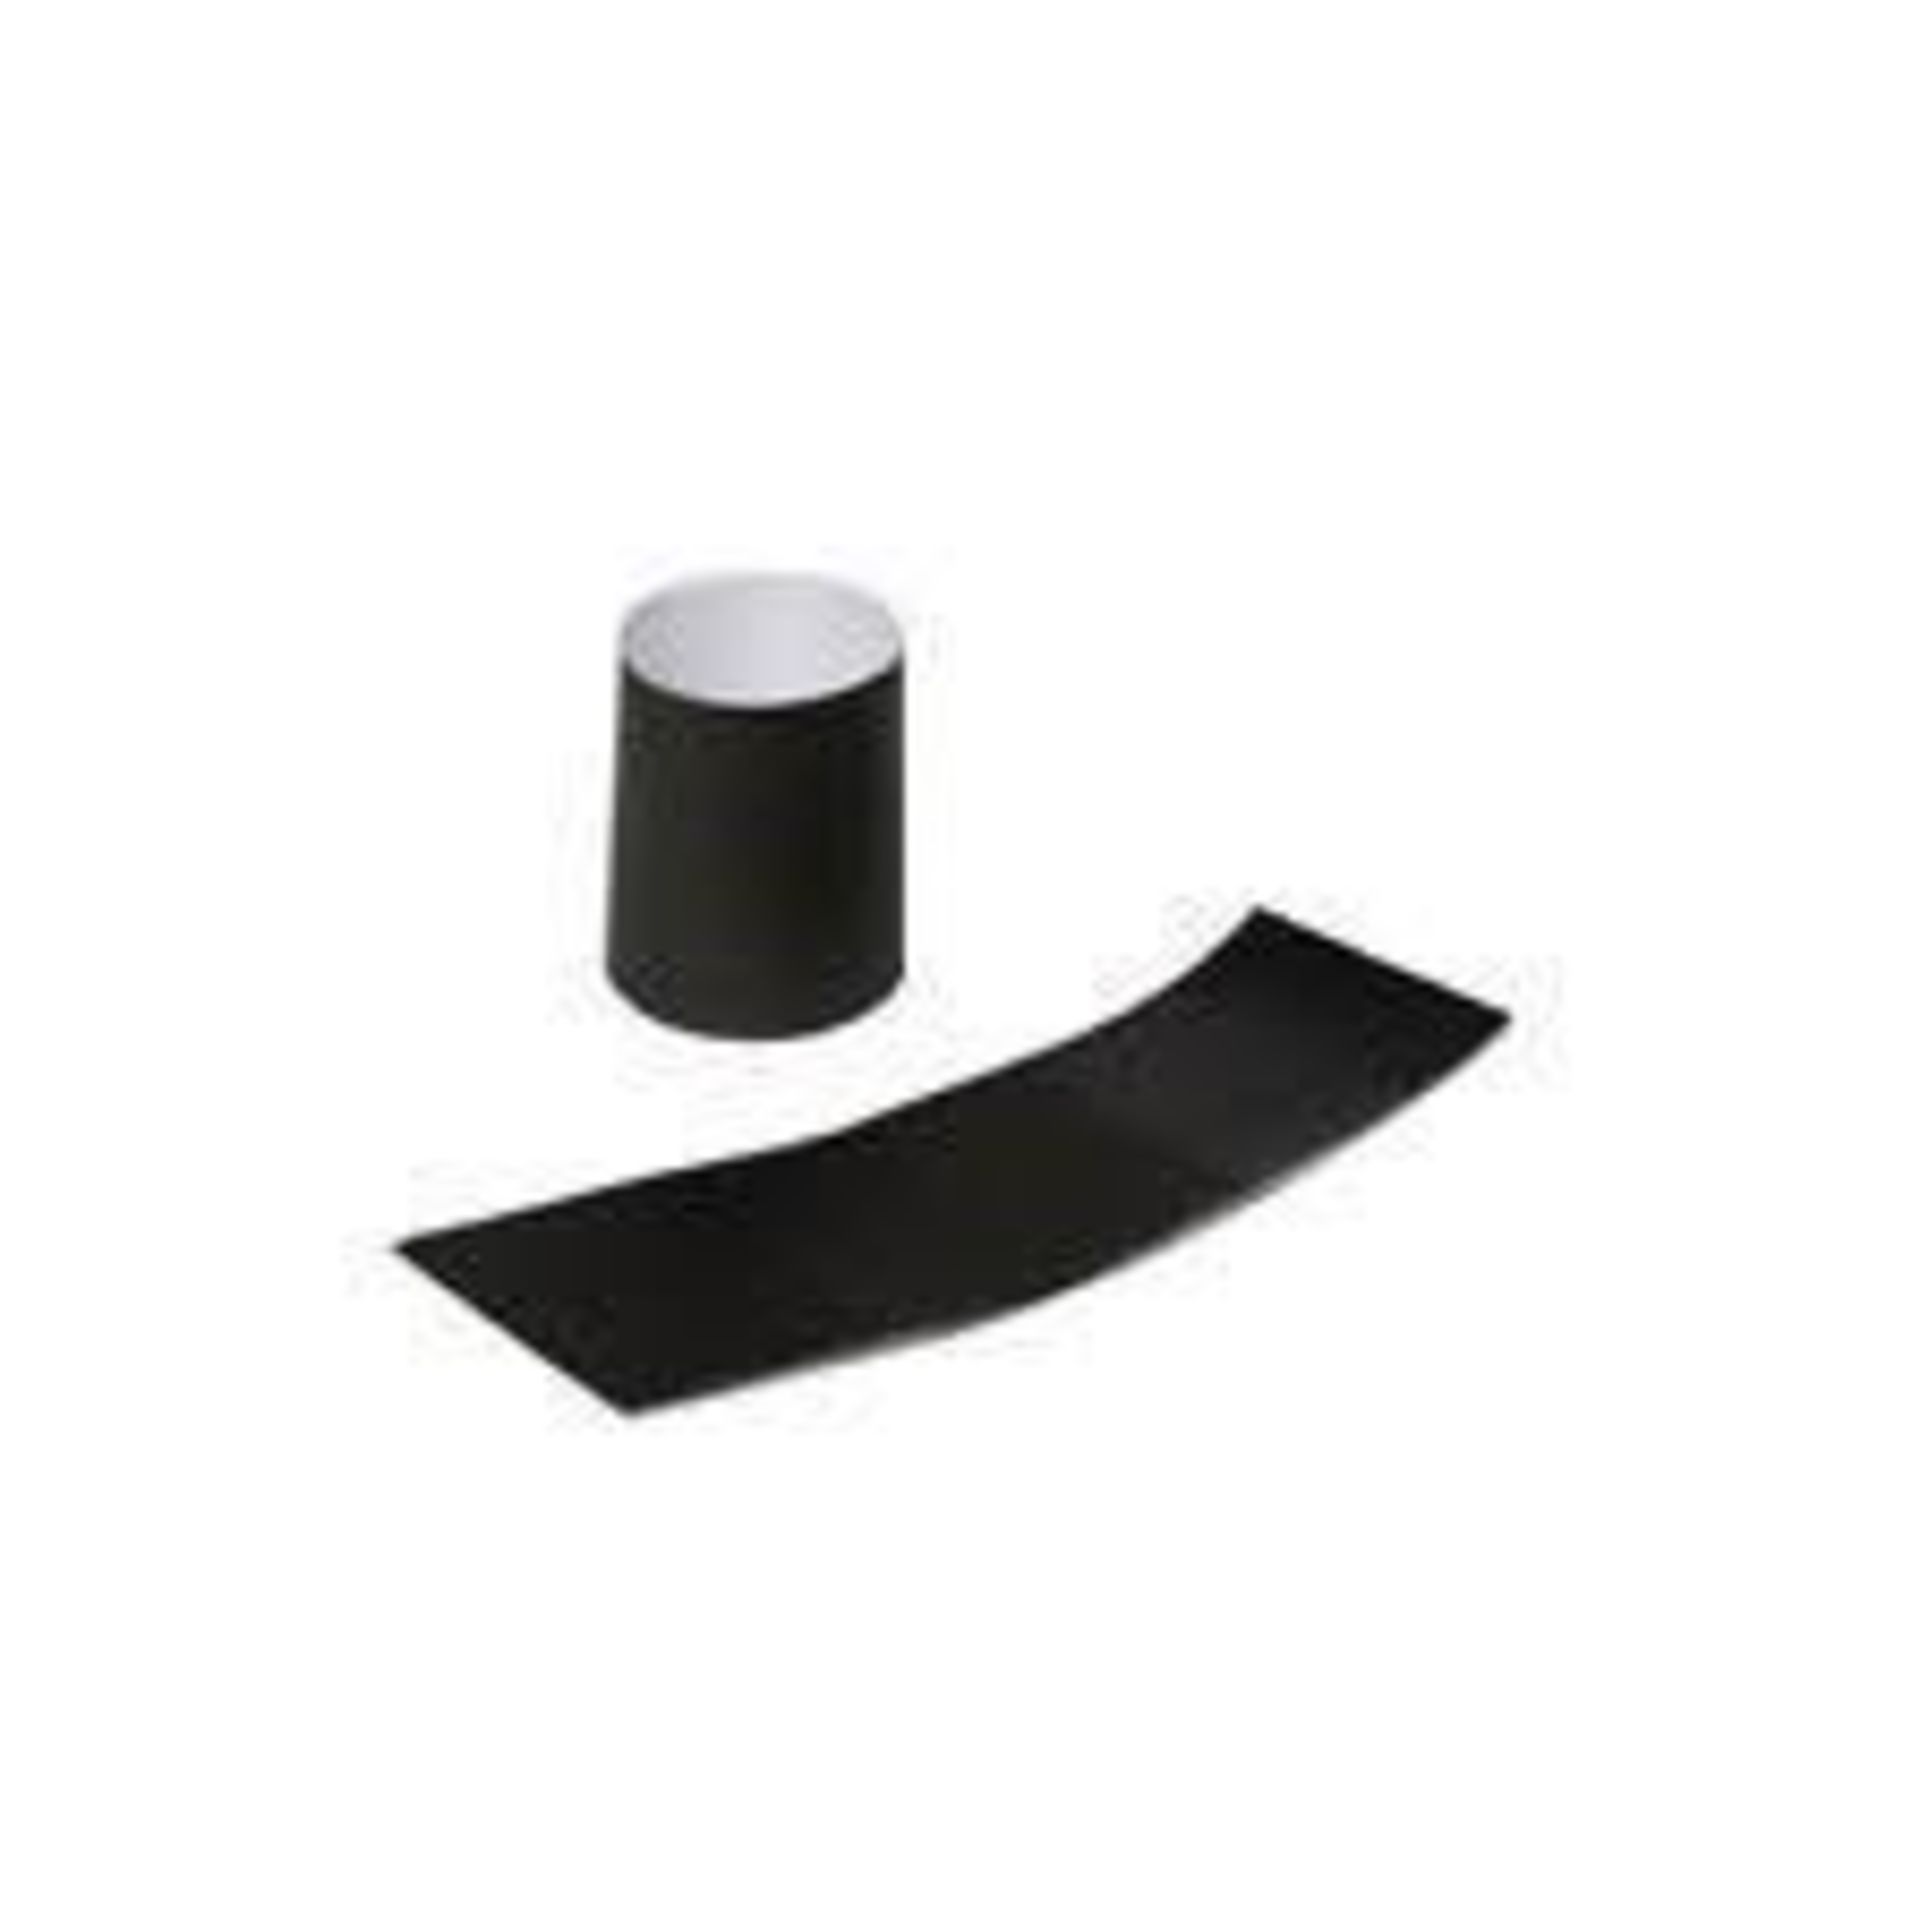 22,500 x Black Royal Napkin Bands - Includes 9 x Boxes of 2,500 - Product Code RNB20MSK - Brand New - Image 2 of 4